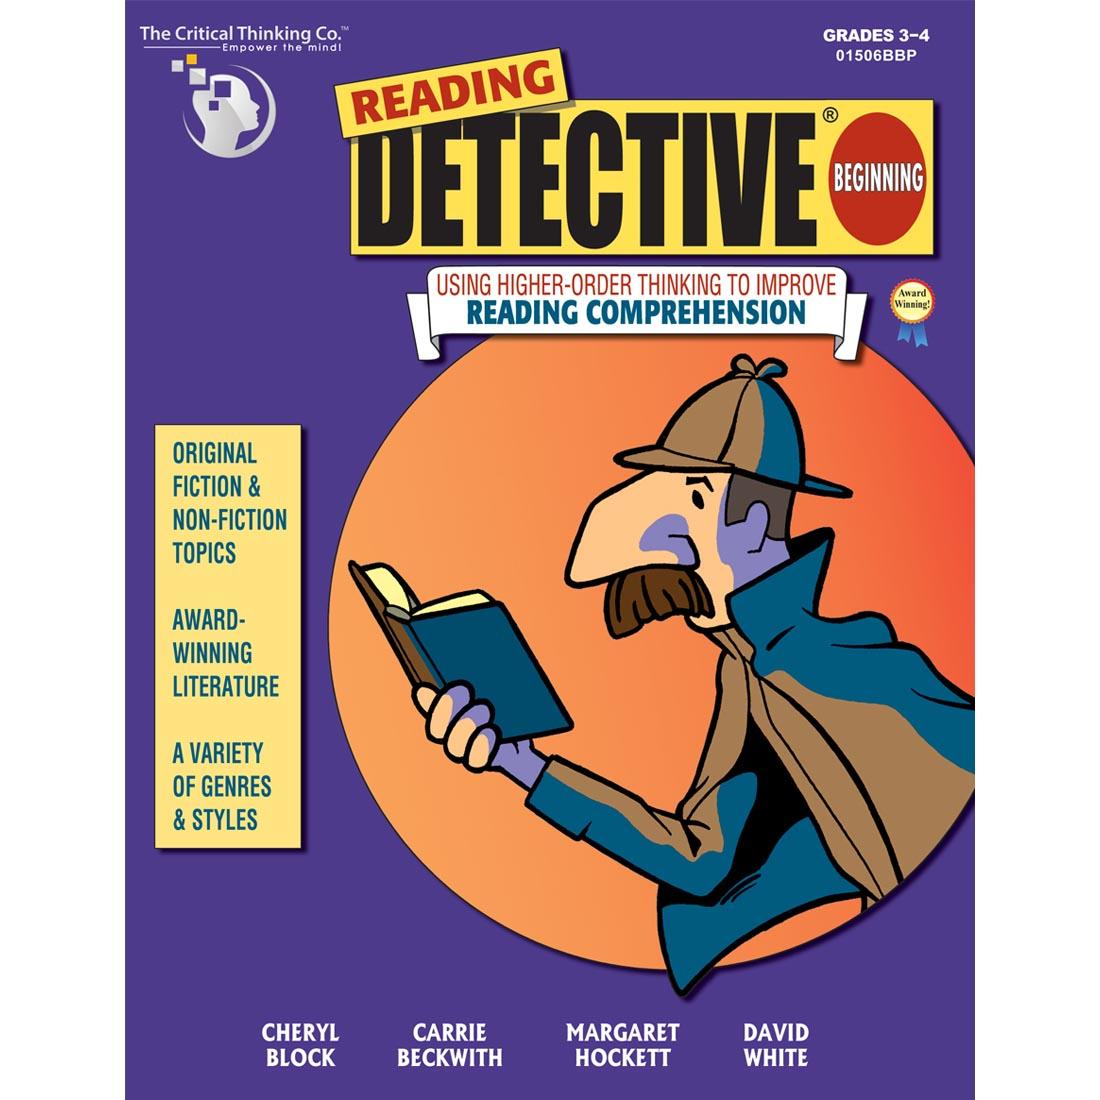 Reading Detective Book - Using Higher-Order Thinking To Improve Reading Comprehension